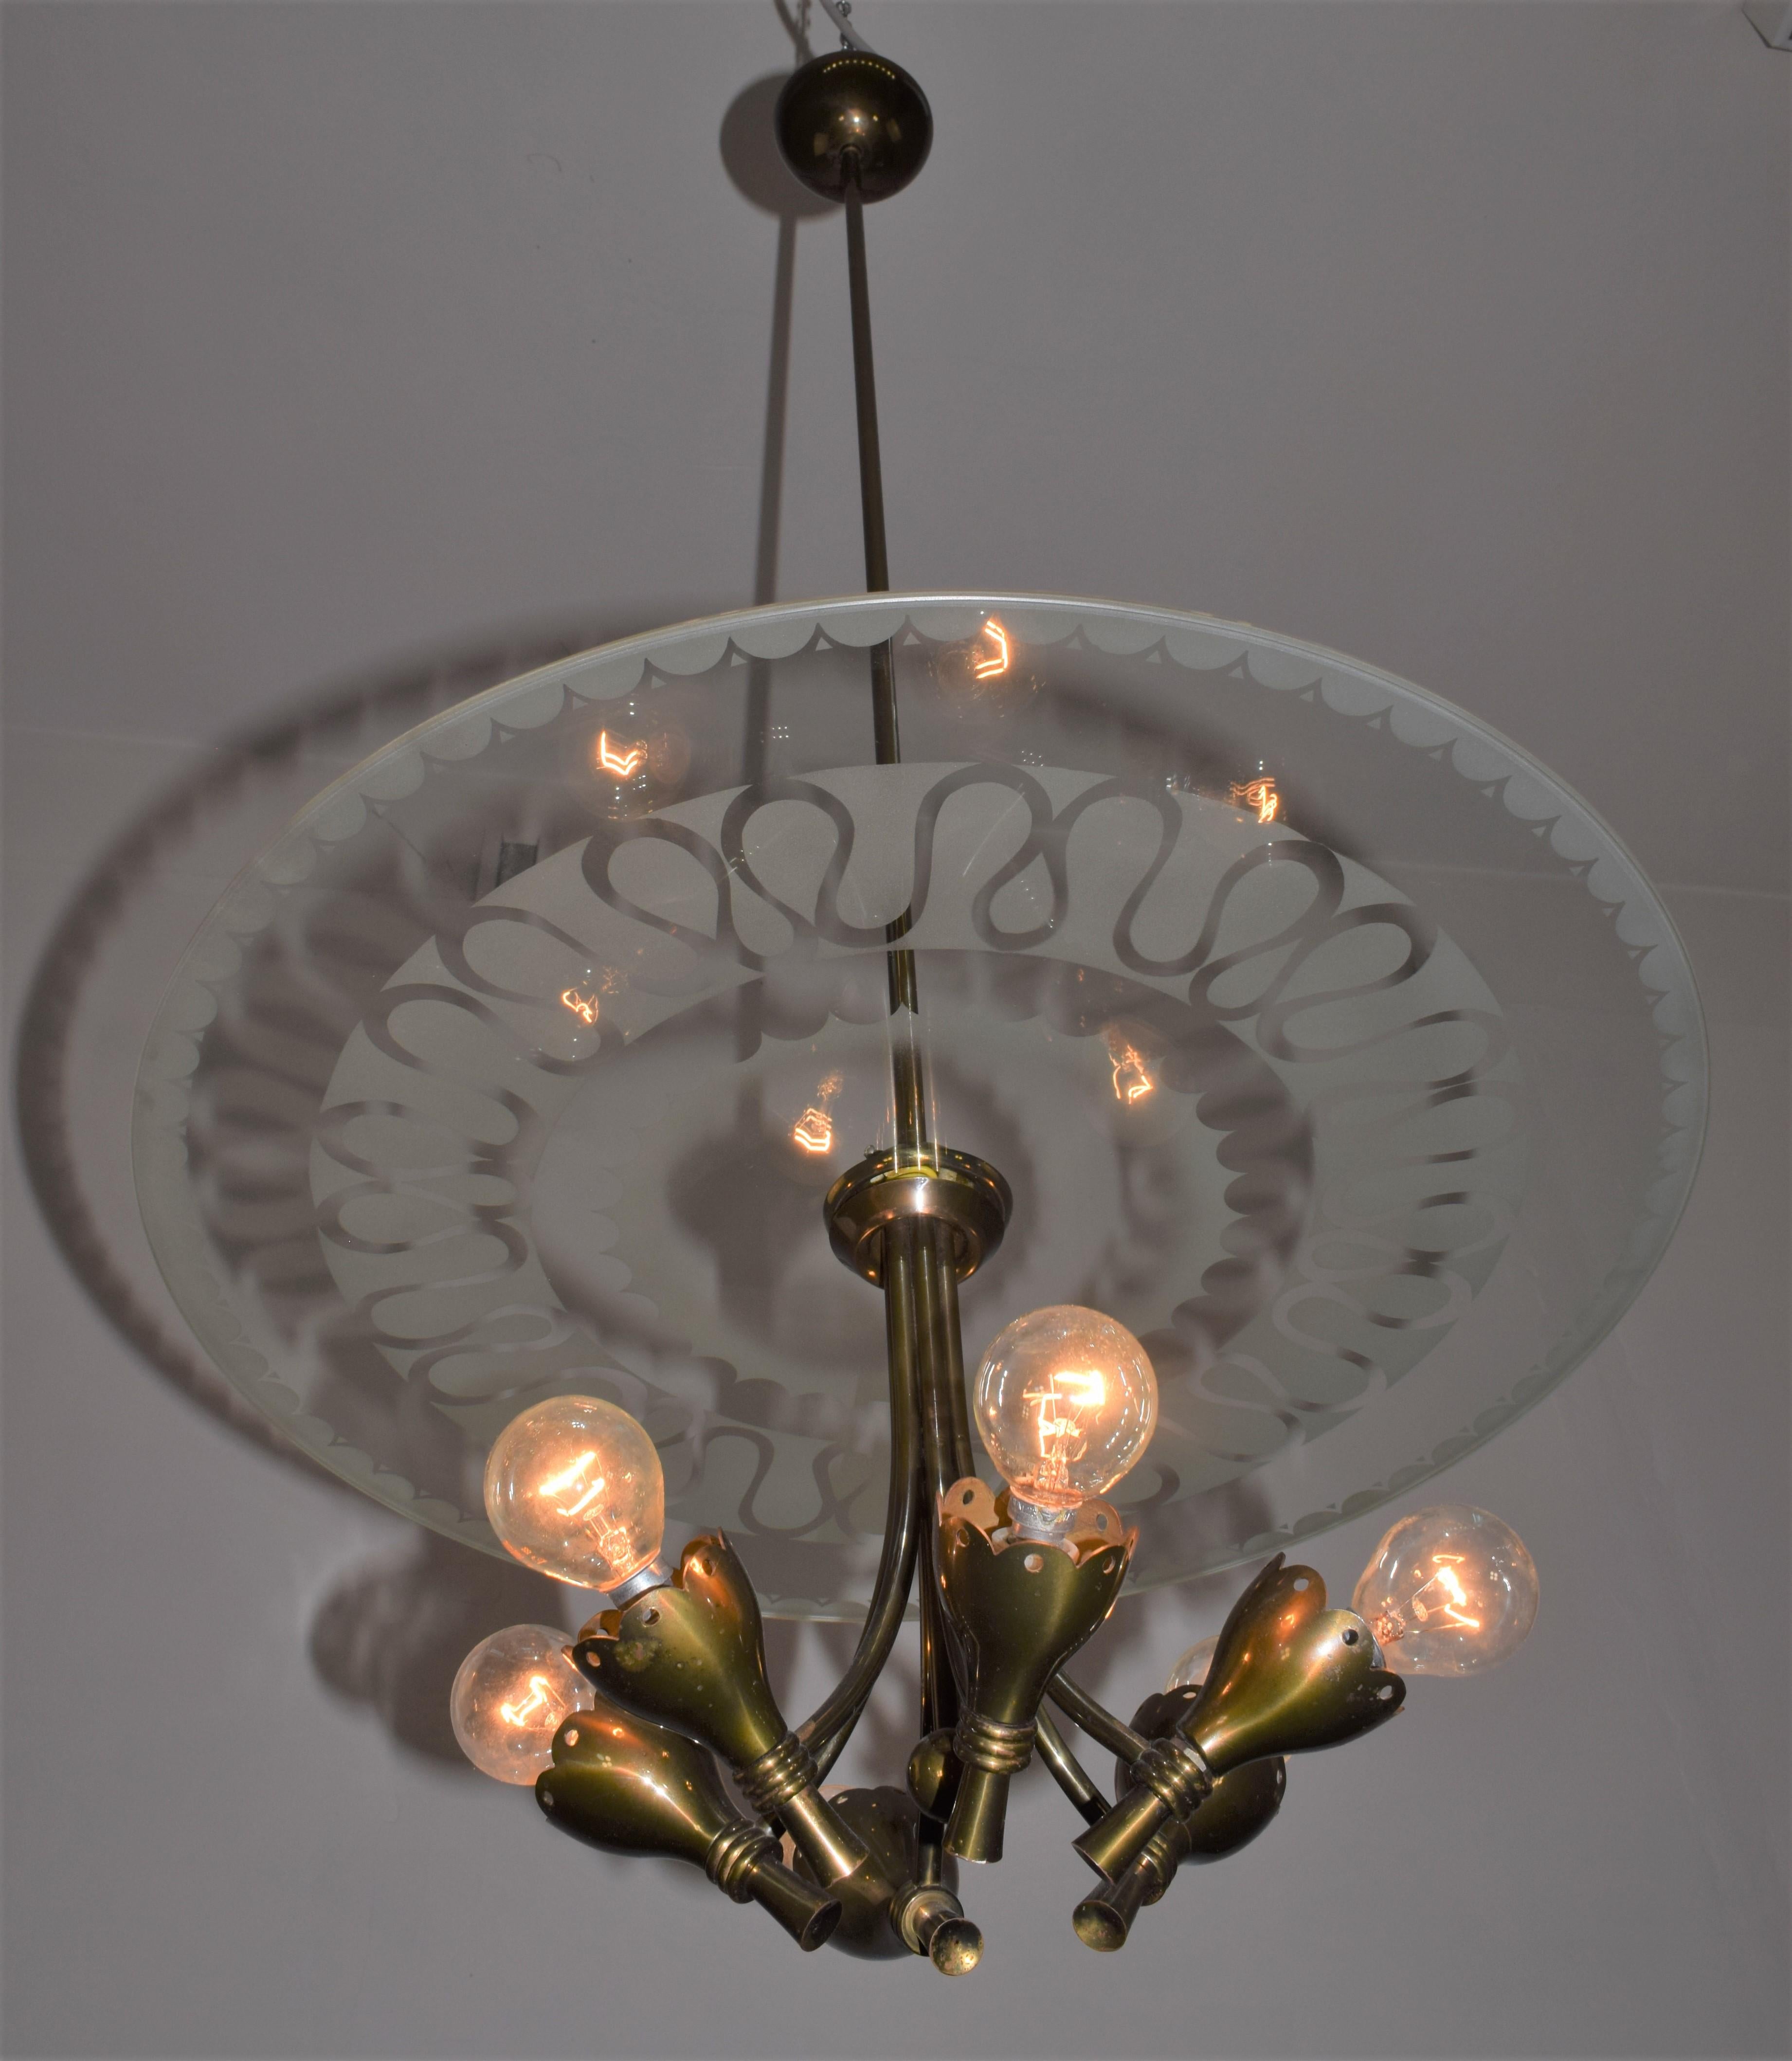 Italian chandelier by Pietro Chiesa for Fontana Arte, 1950s.
Very good condition.

Dimensions: H= 115 cm; D= 51 cm.